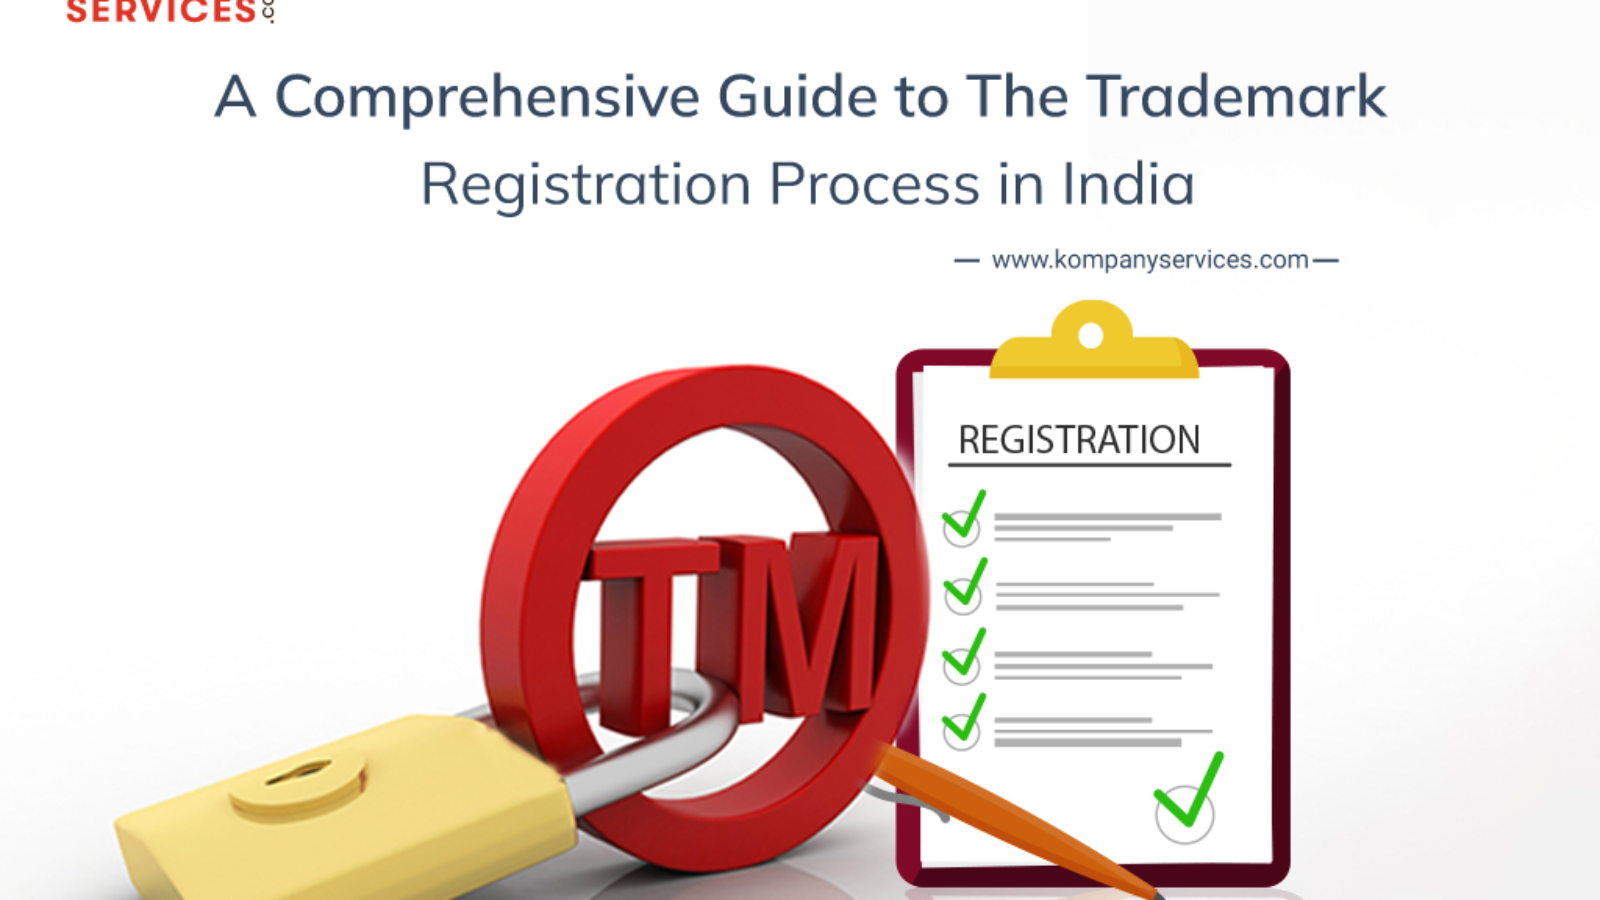 A Comprehensive Guide to the Trademark Registration Process in India